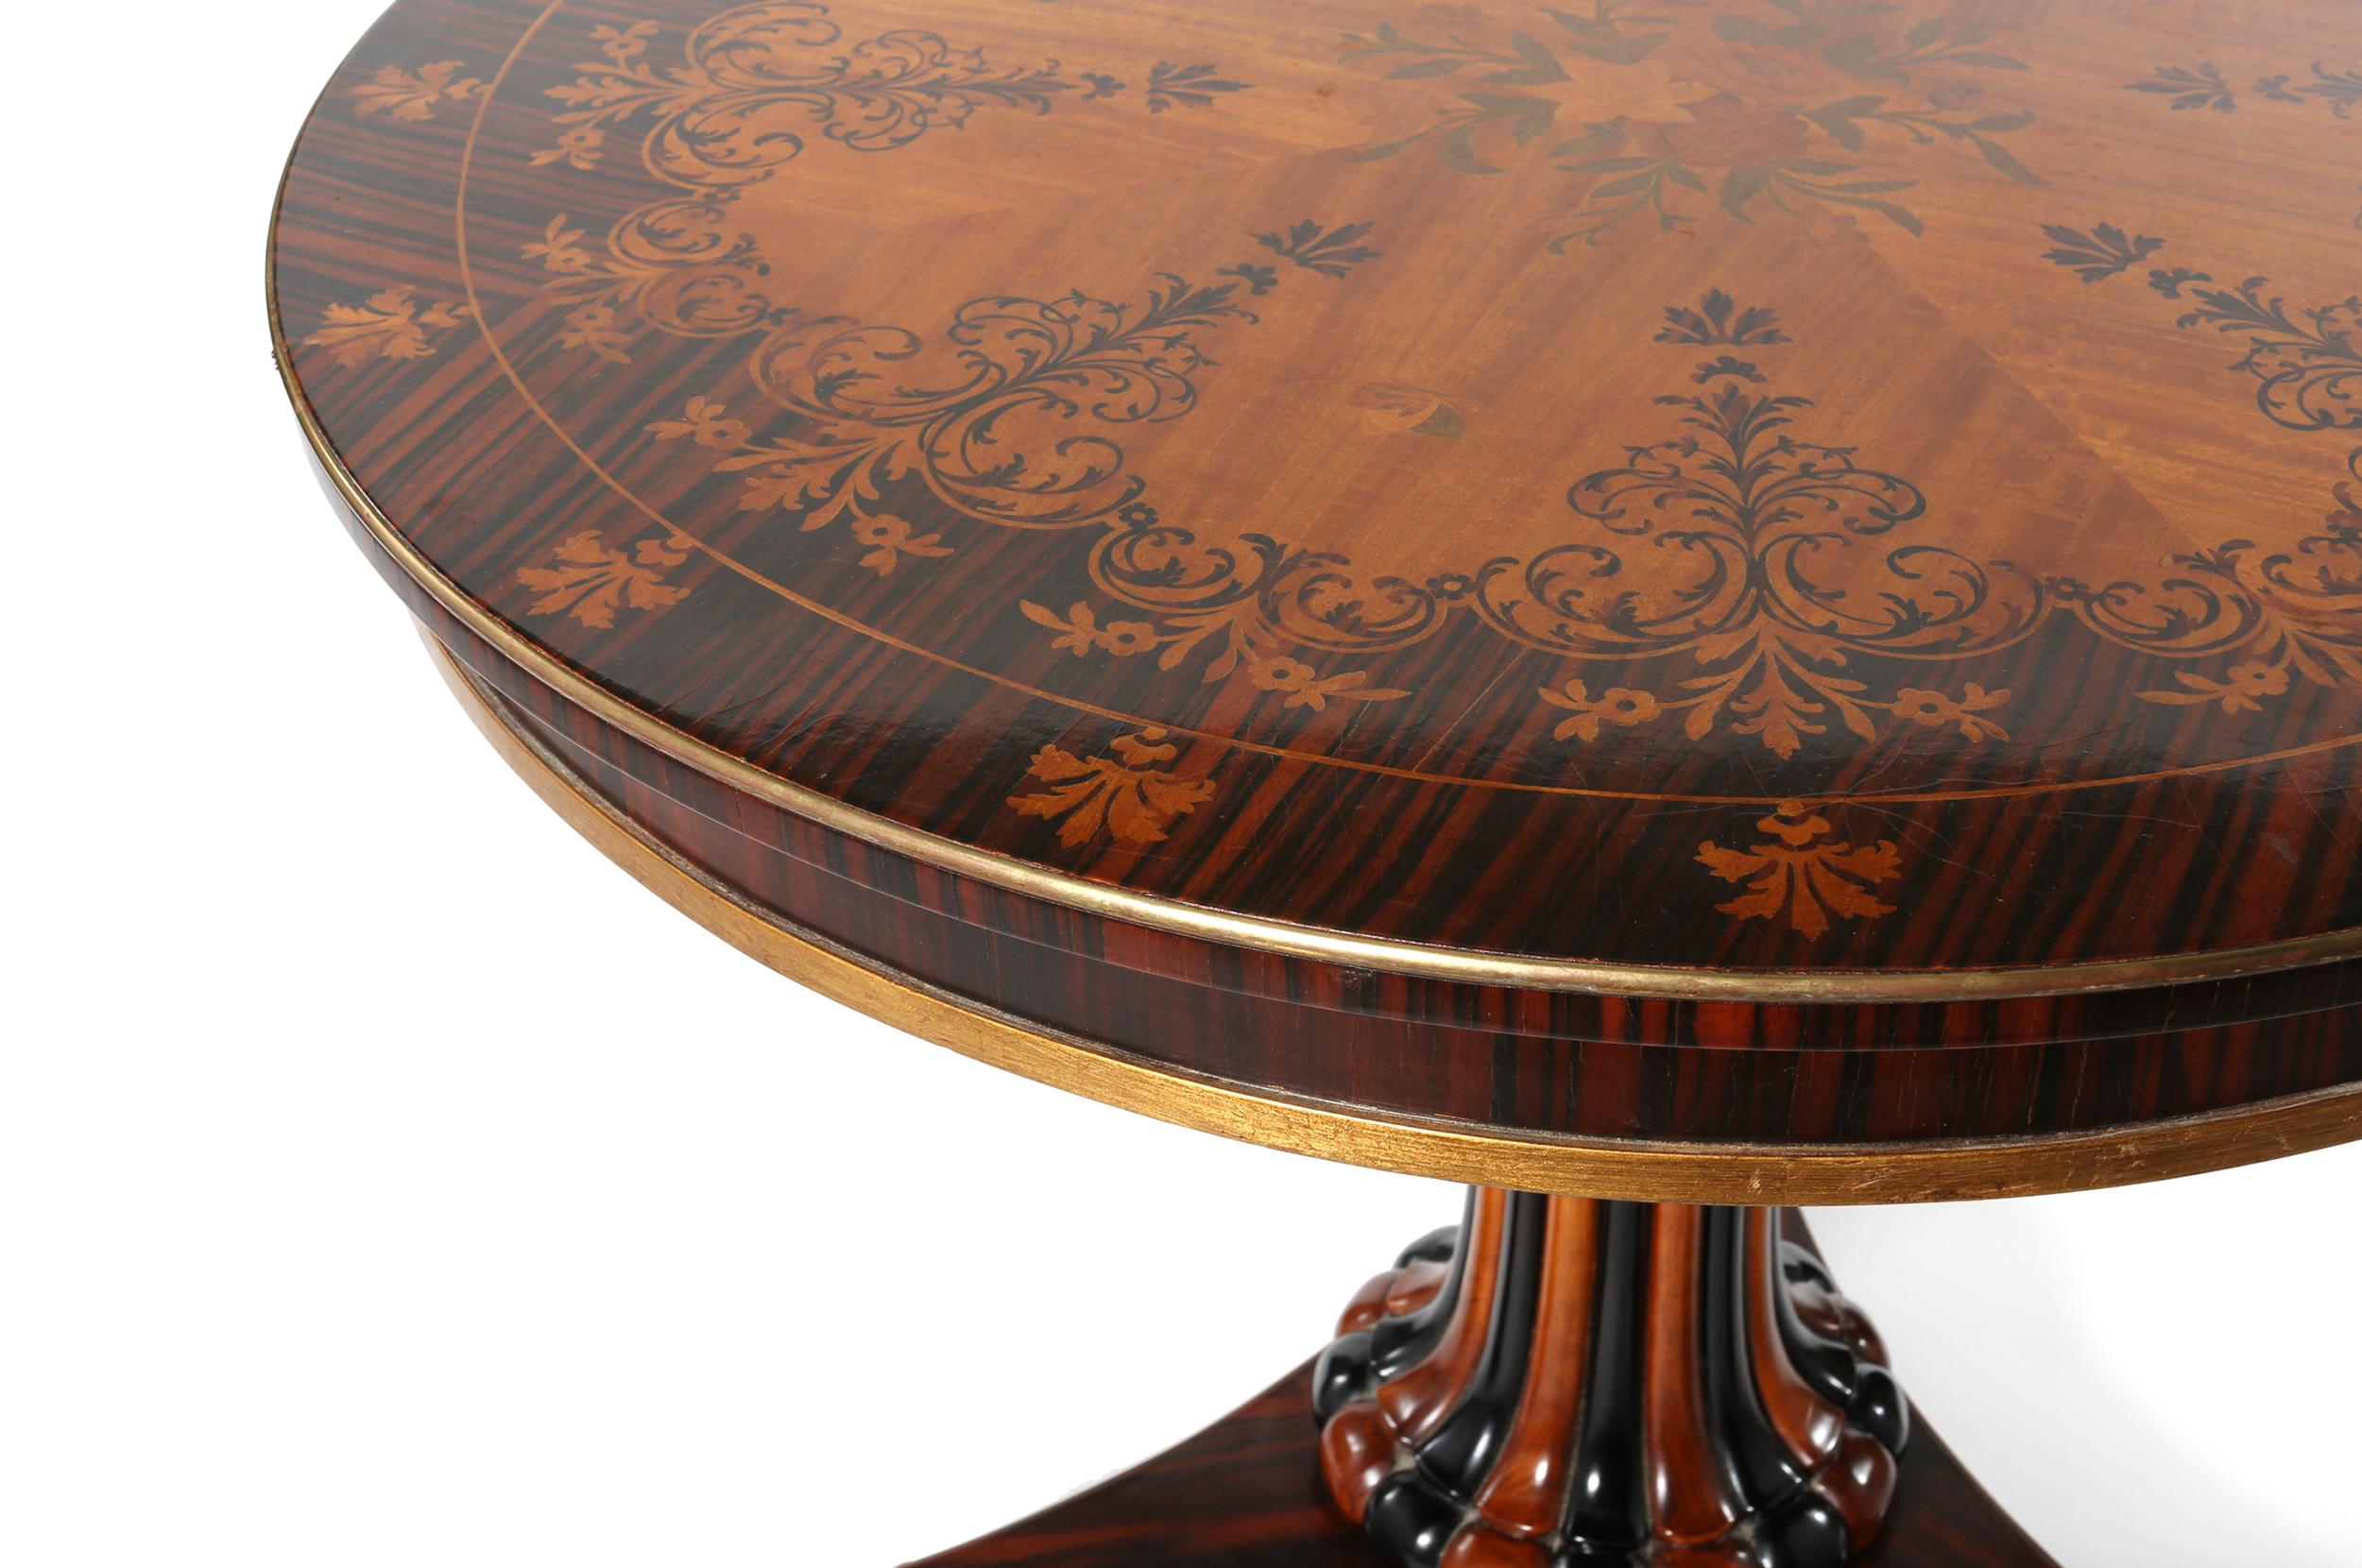 Neoclassical Revival Round Shape Marquetry Top Pedestal Center Table For Sale